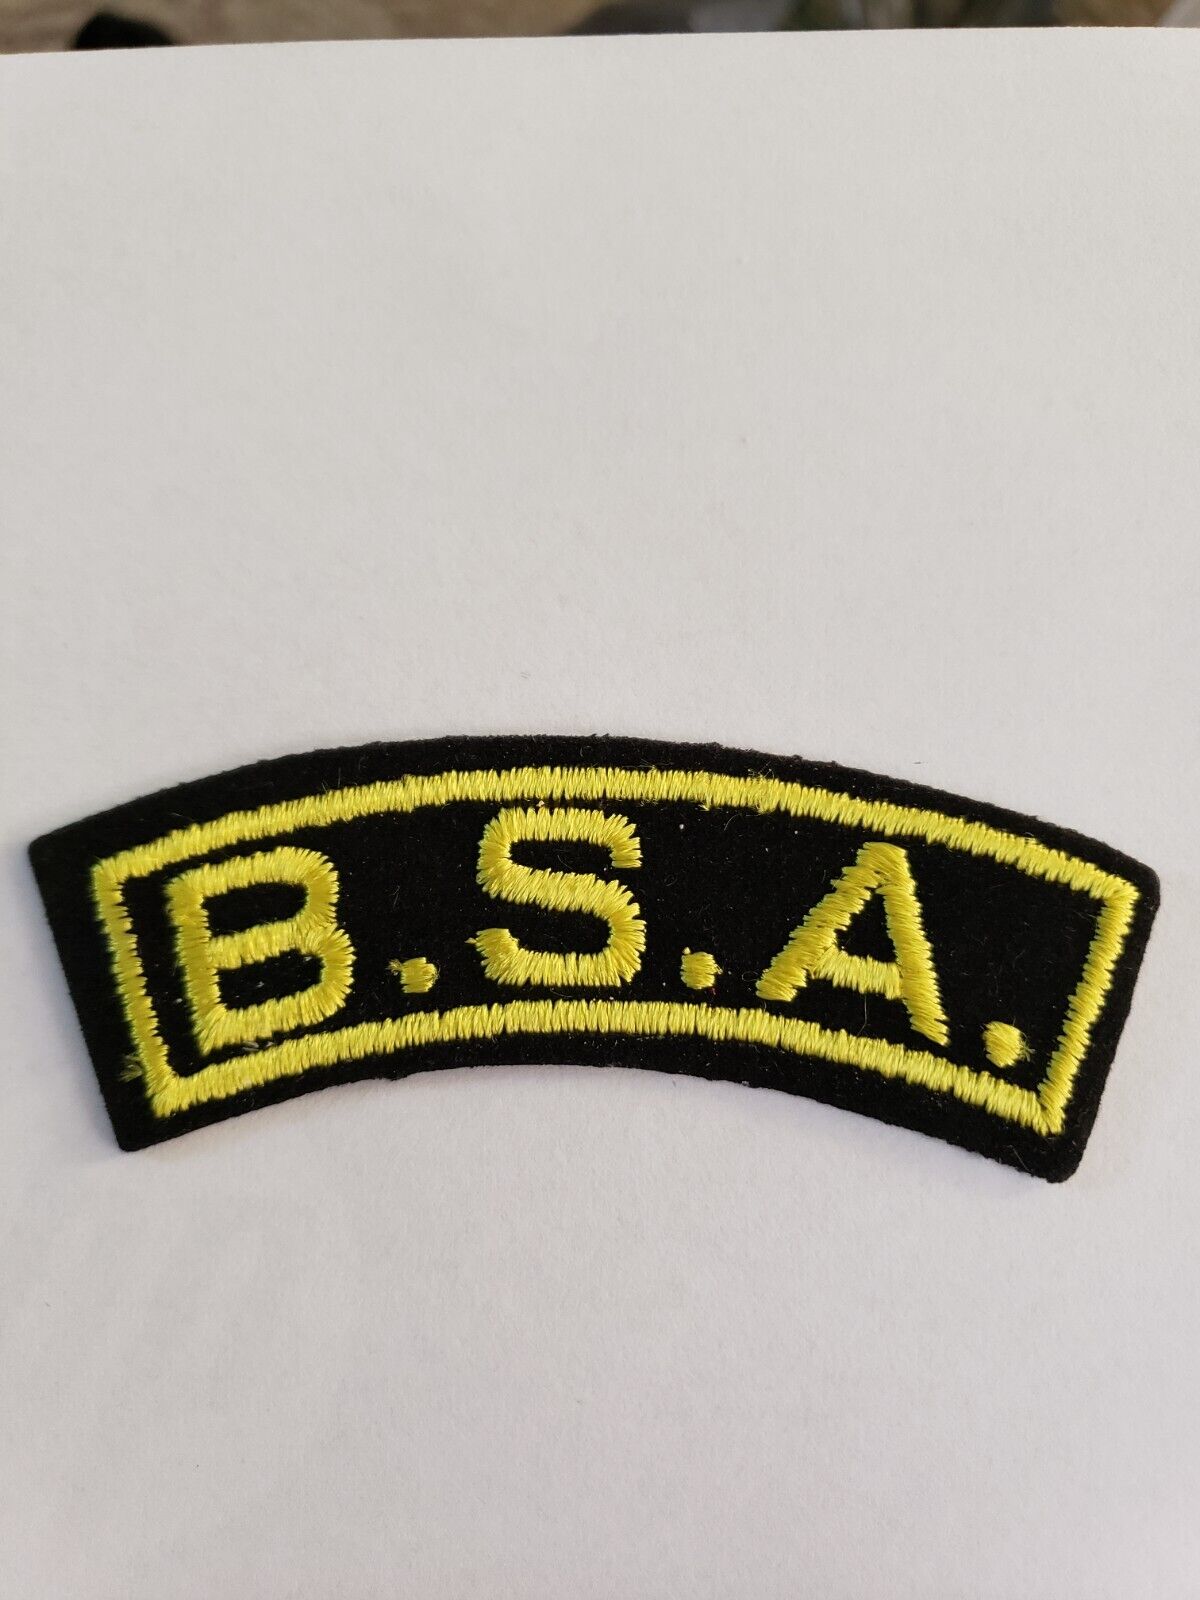 Vintage BSA Motorcycle Patch, BSA Motorcycle Patch